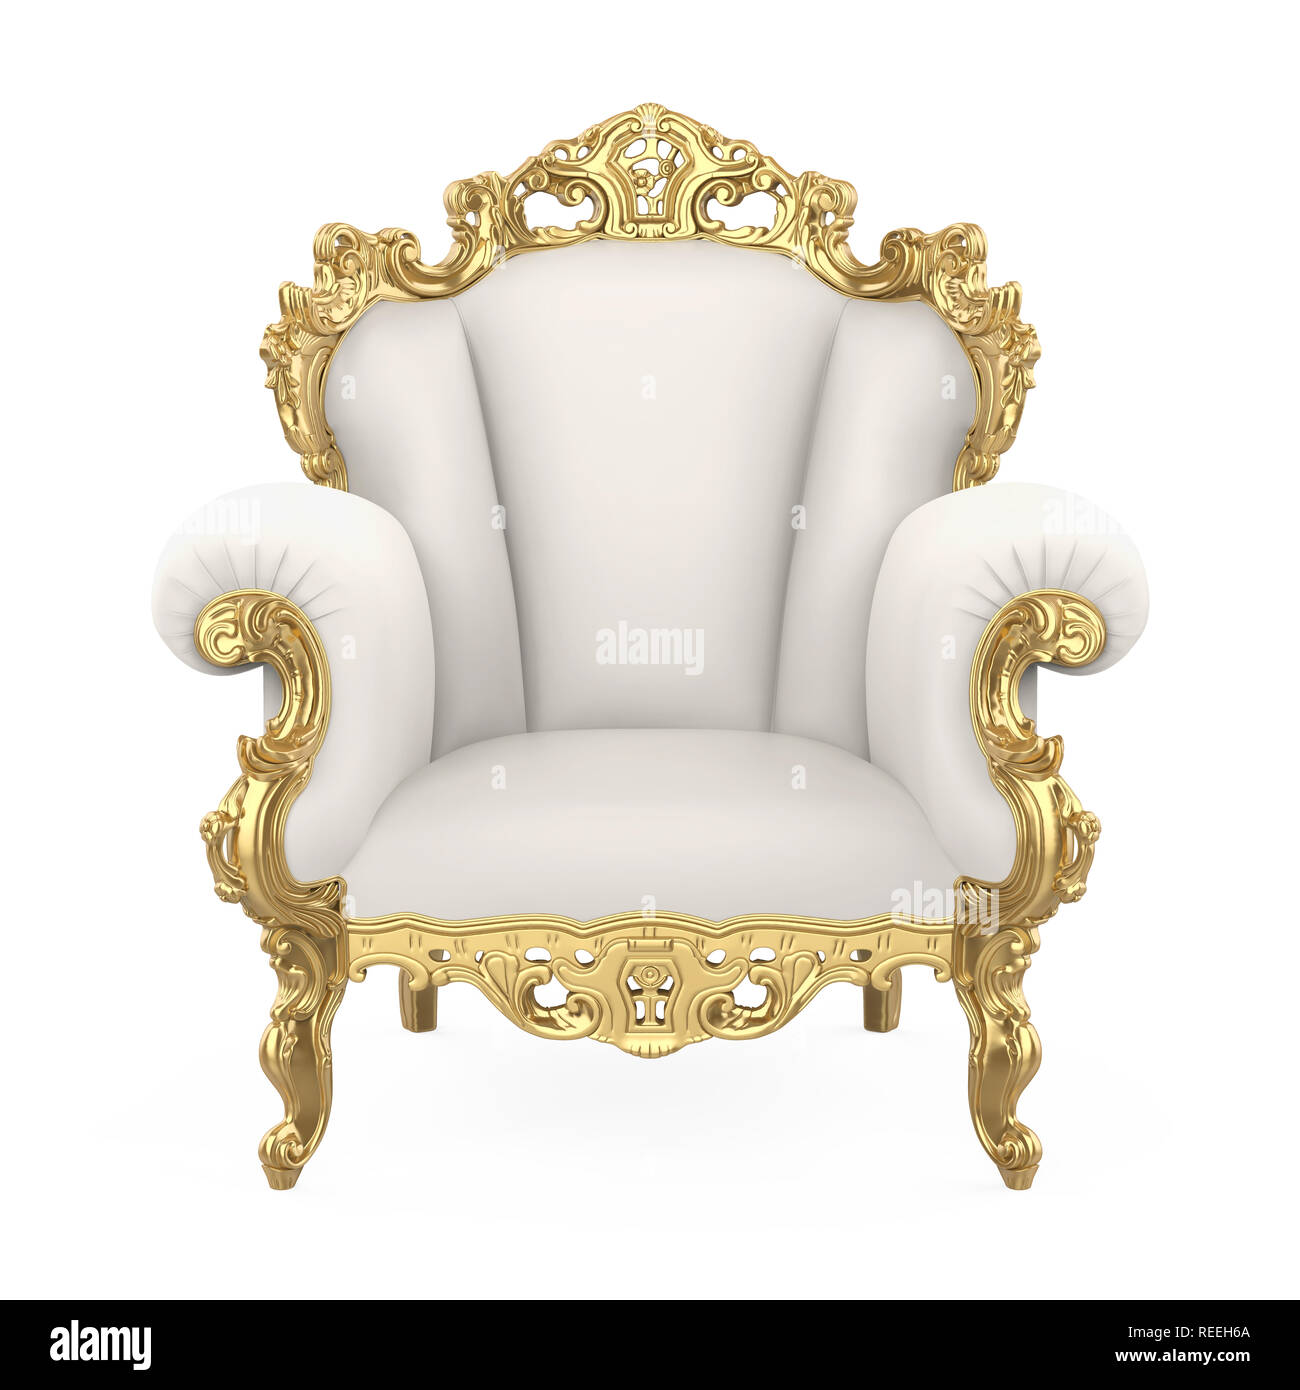 https://c8.alamy.com/comp/REEH6A/throne-chair-isolated-REEH6A.jpg